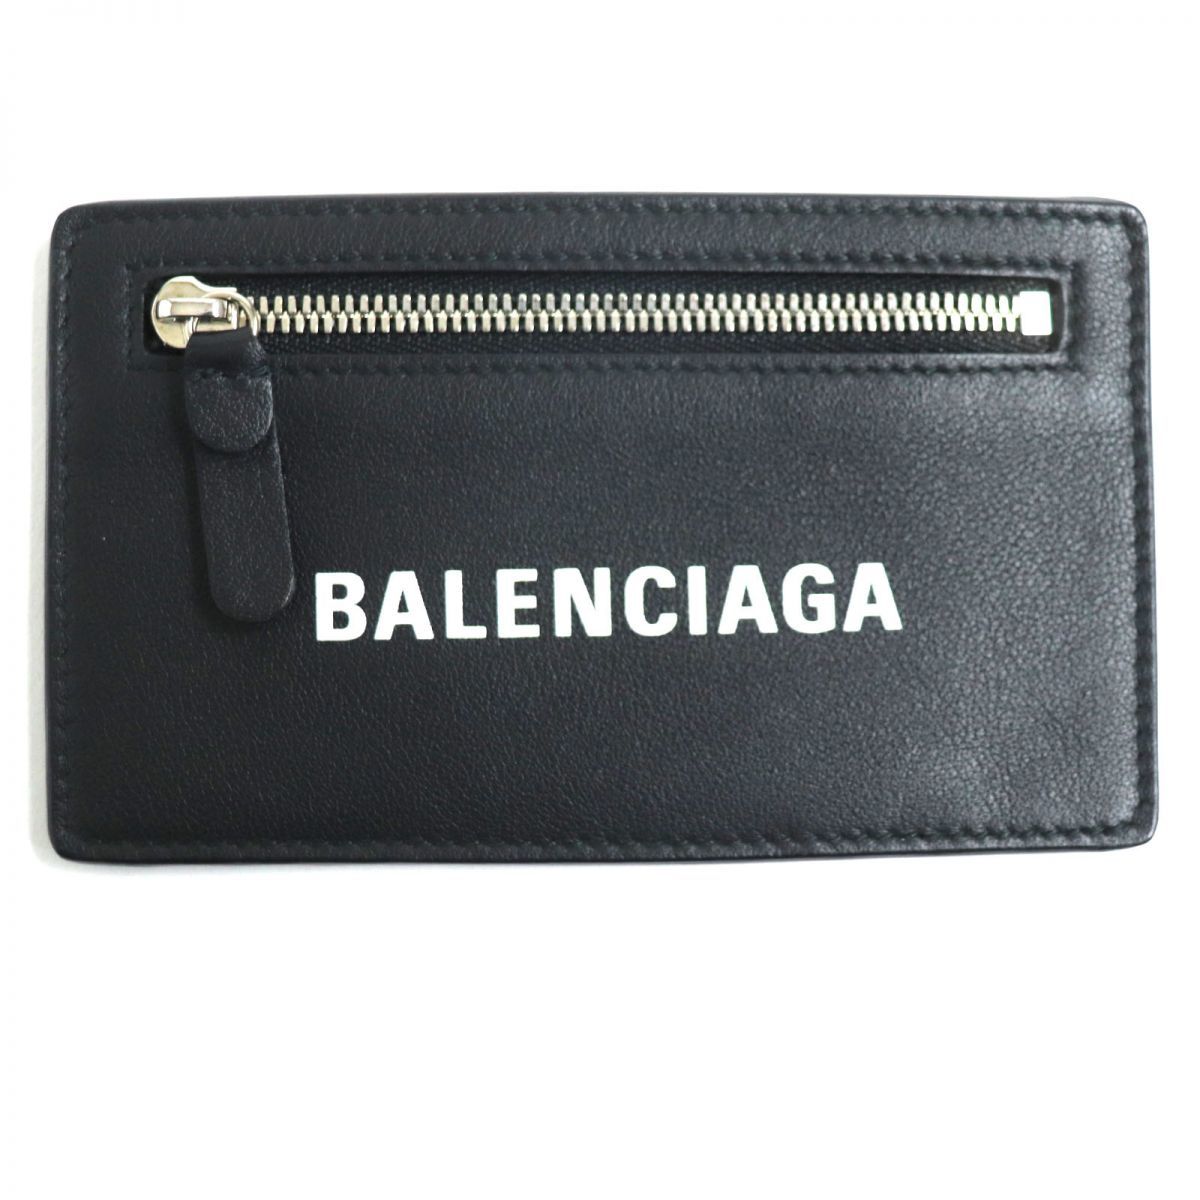  ultimate beautiful goods V Balenciaga 501651 with logo leather coin perth / card-case / pass case black × white men's made in Italy box * storage bag attaching 